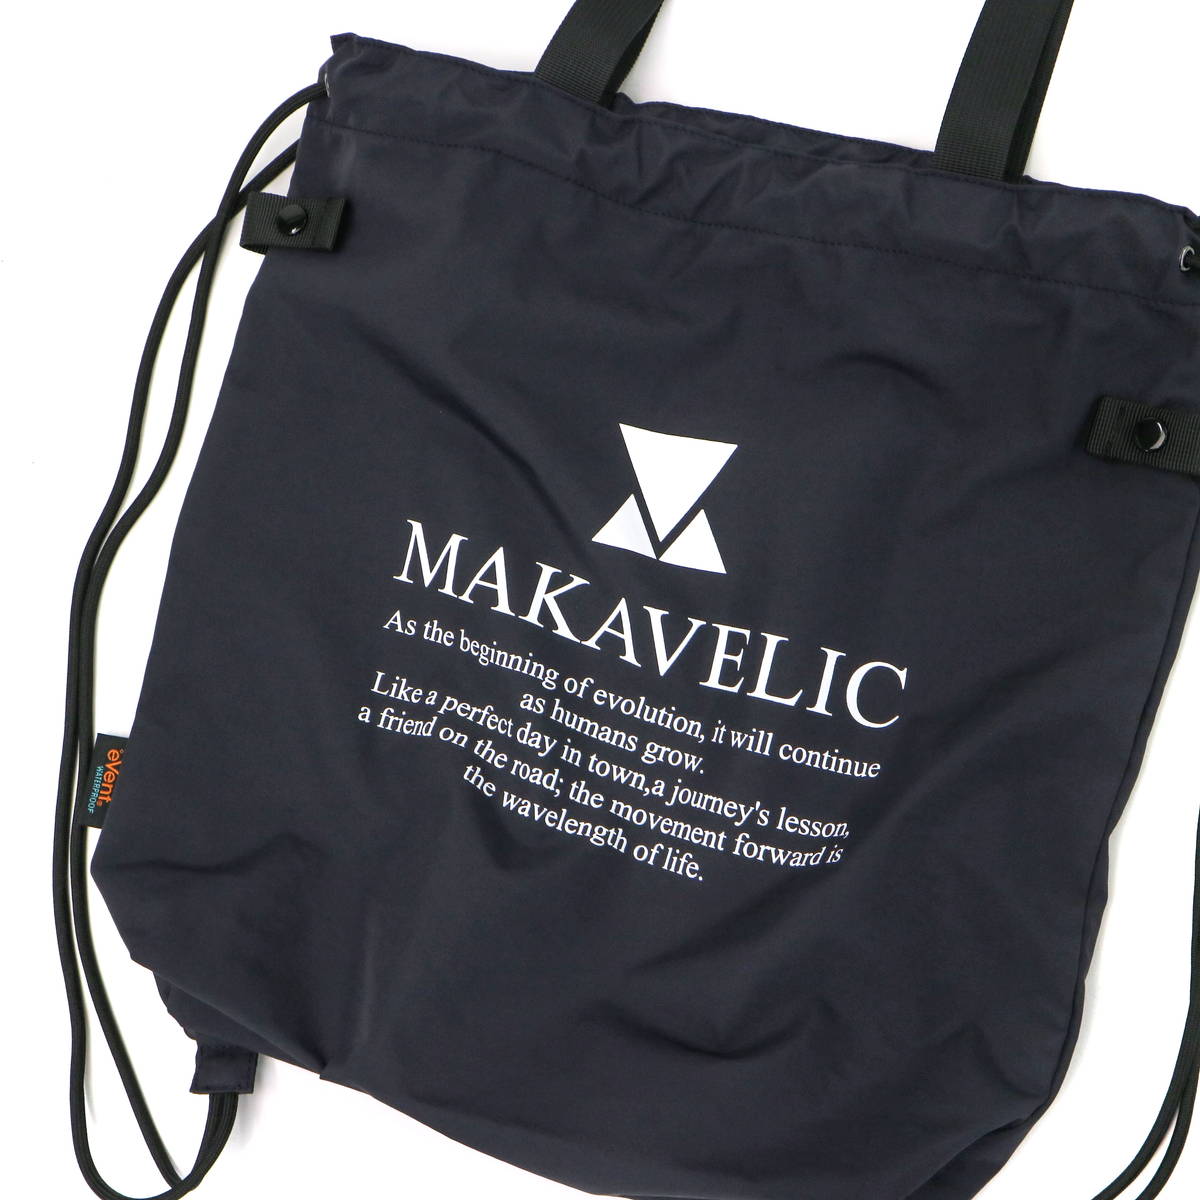 MAKAVELIC マキャベリック LIMITED eVent Knapsack Tote 3120-10203